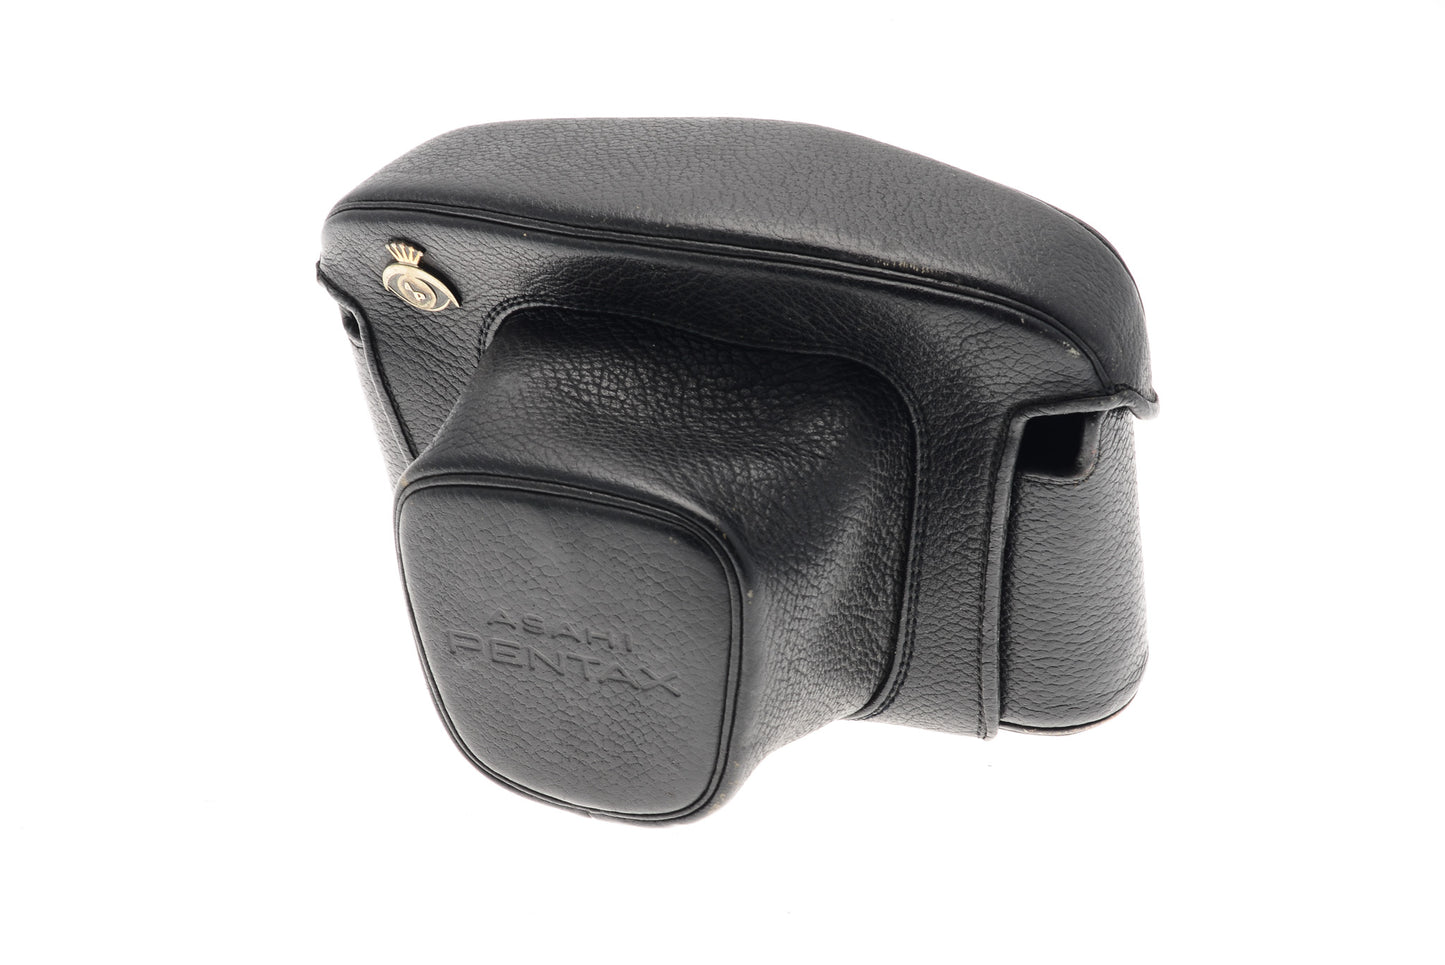 Pentax Leather Case For Spotmatic - Accessory